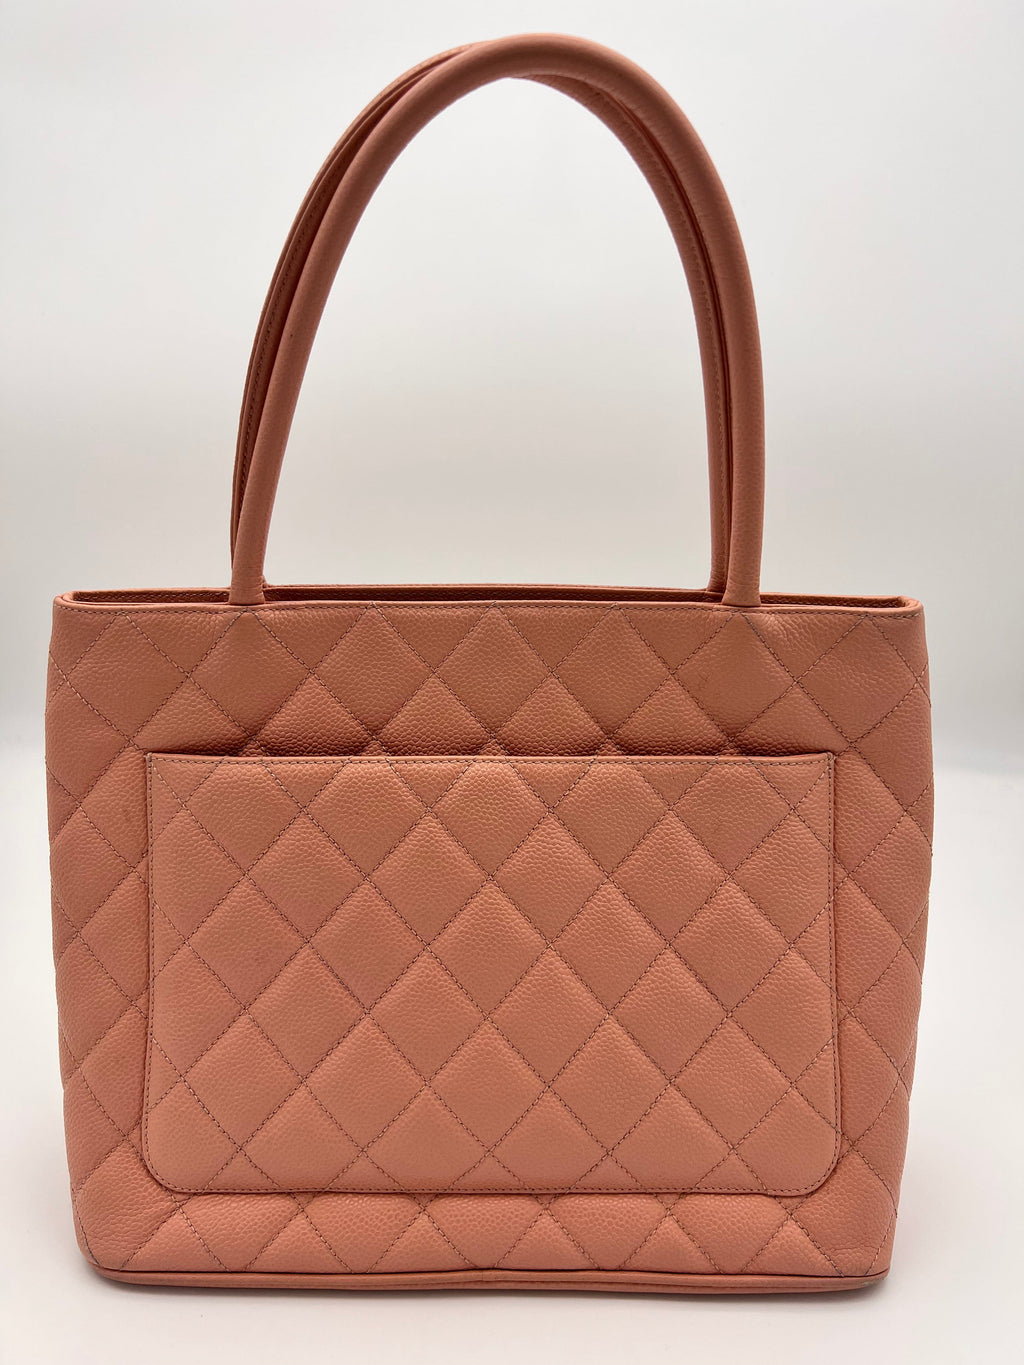 Chanel Pink Caviar Medallion Tote Bag AGL2382 – LuxuryPromise